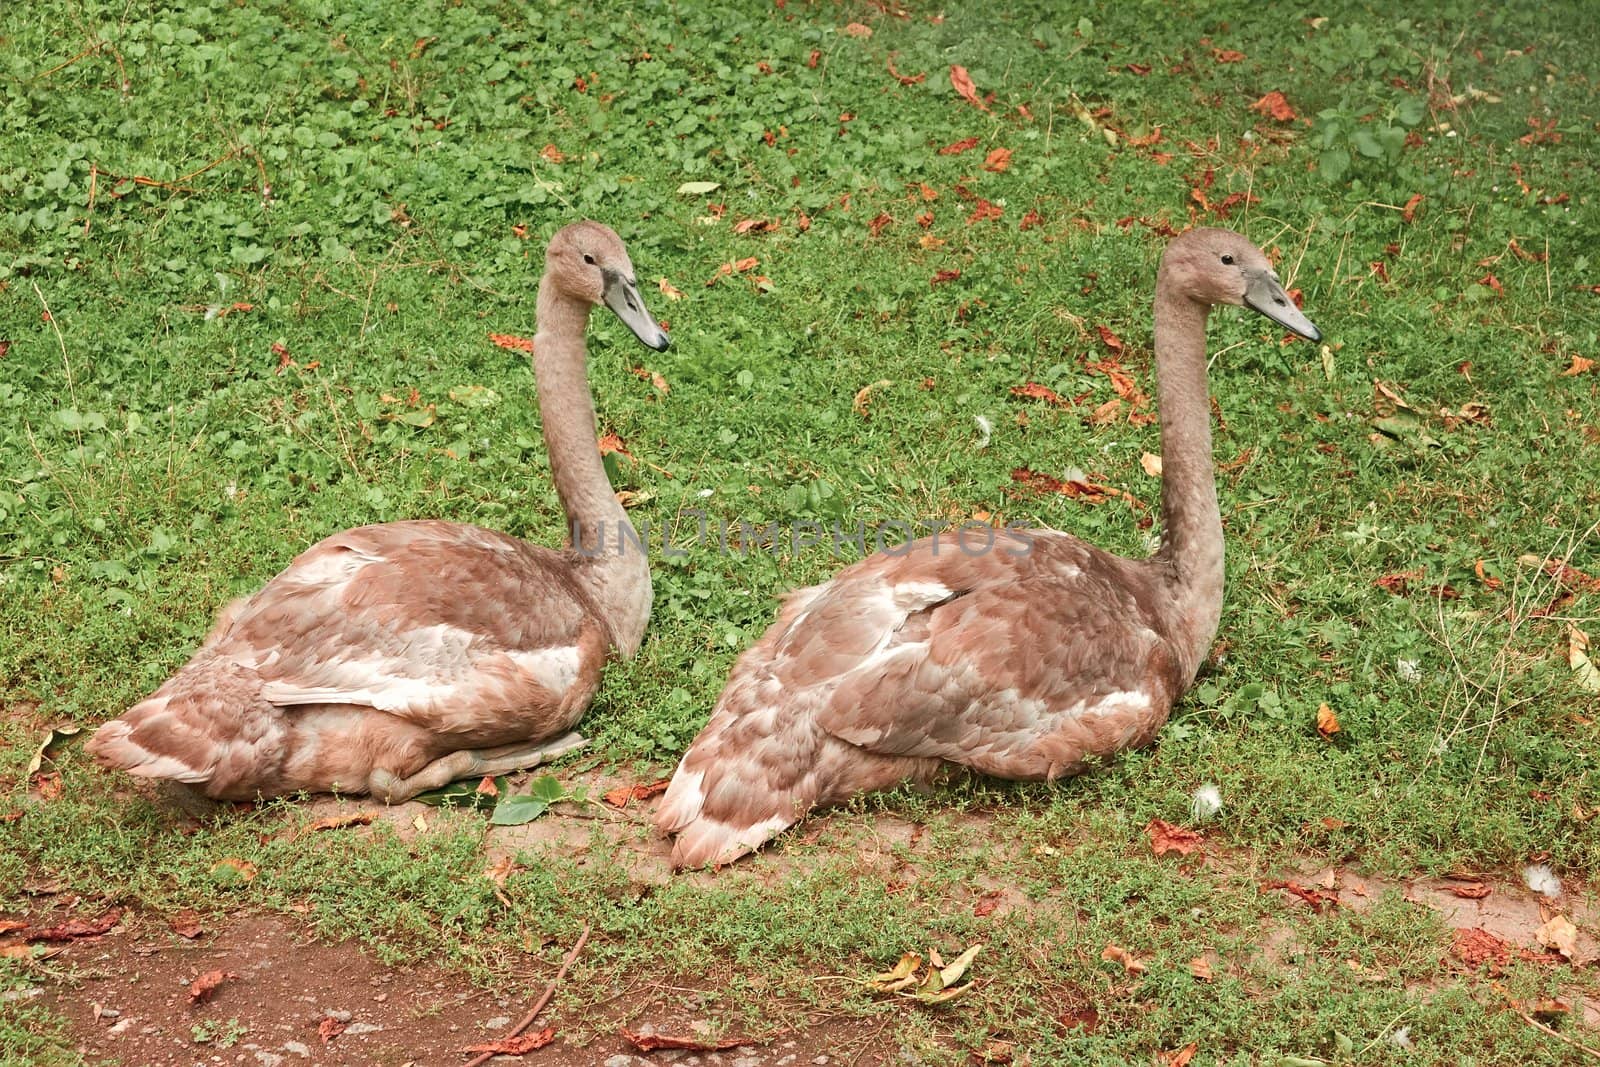 Two young swans sitting on green grass when changing plumage in autumn season